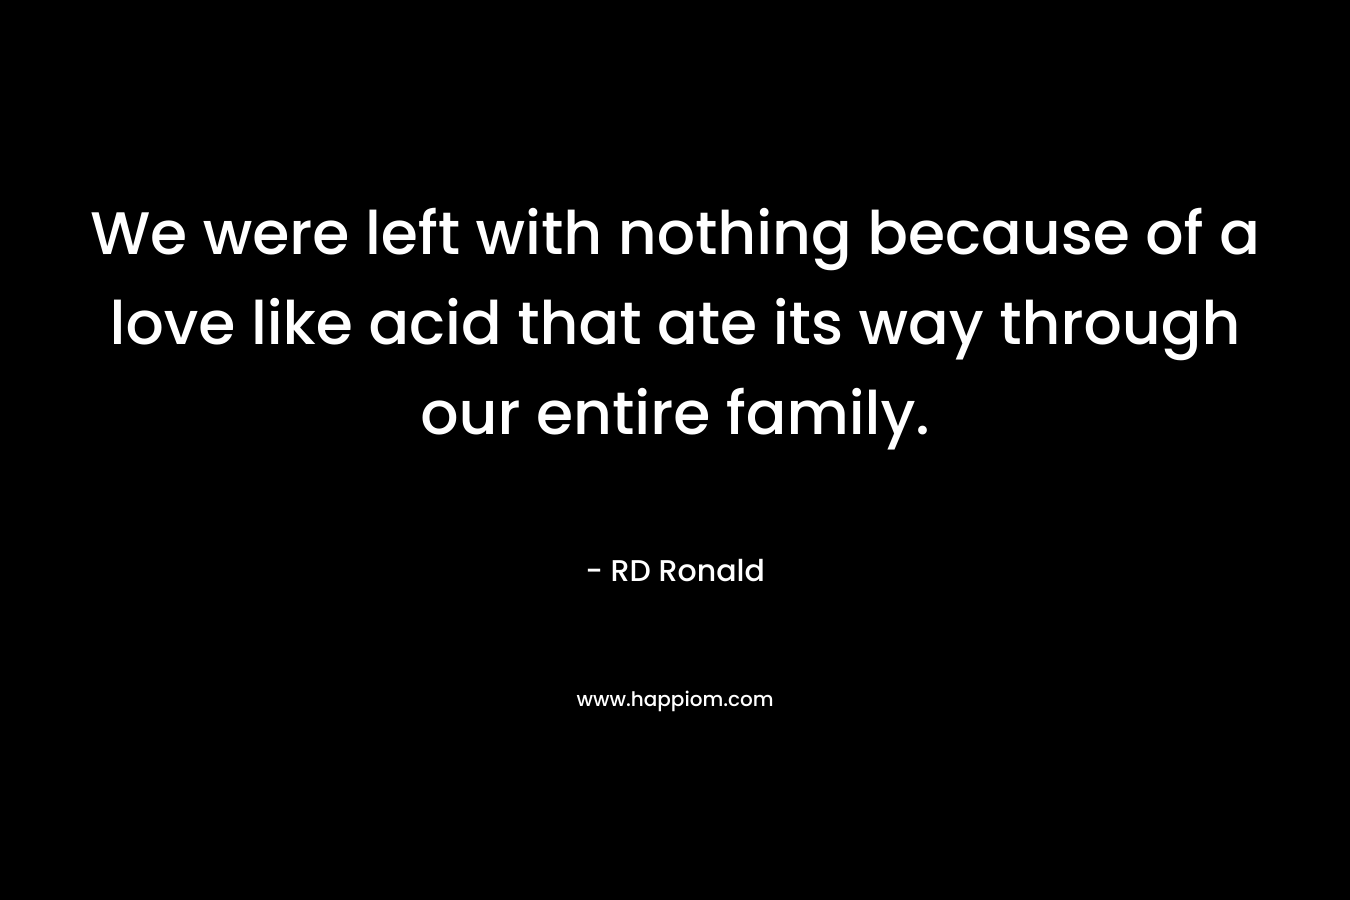 We were left with nothing because of a love like acid that ate its way through our entire family.